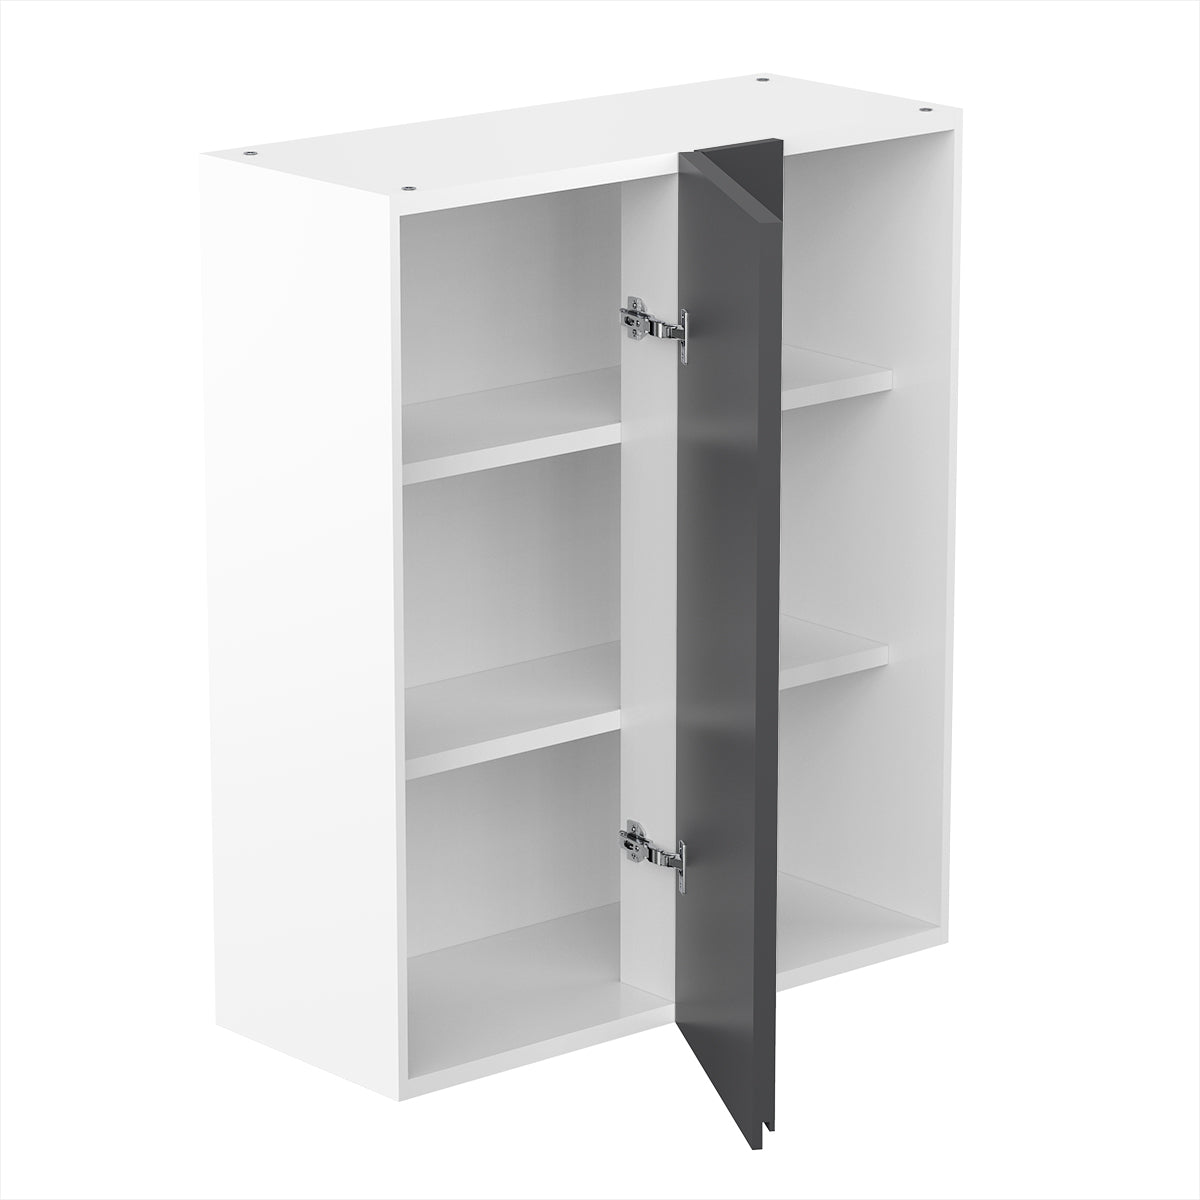 RTA - Lacquer Grey - Single Door Wall Cabinets | 30"W x 36"H x 12"D